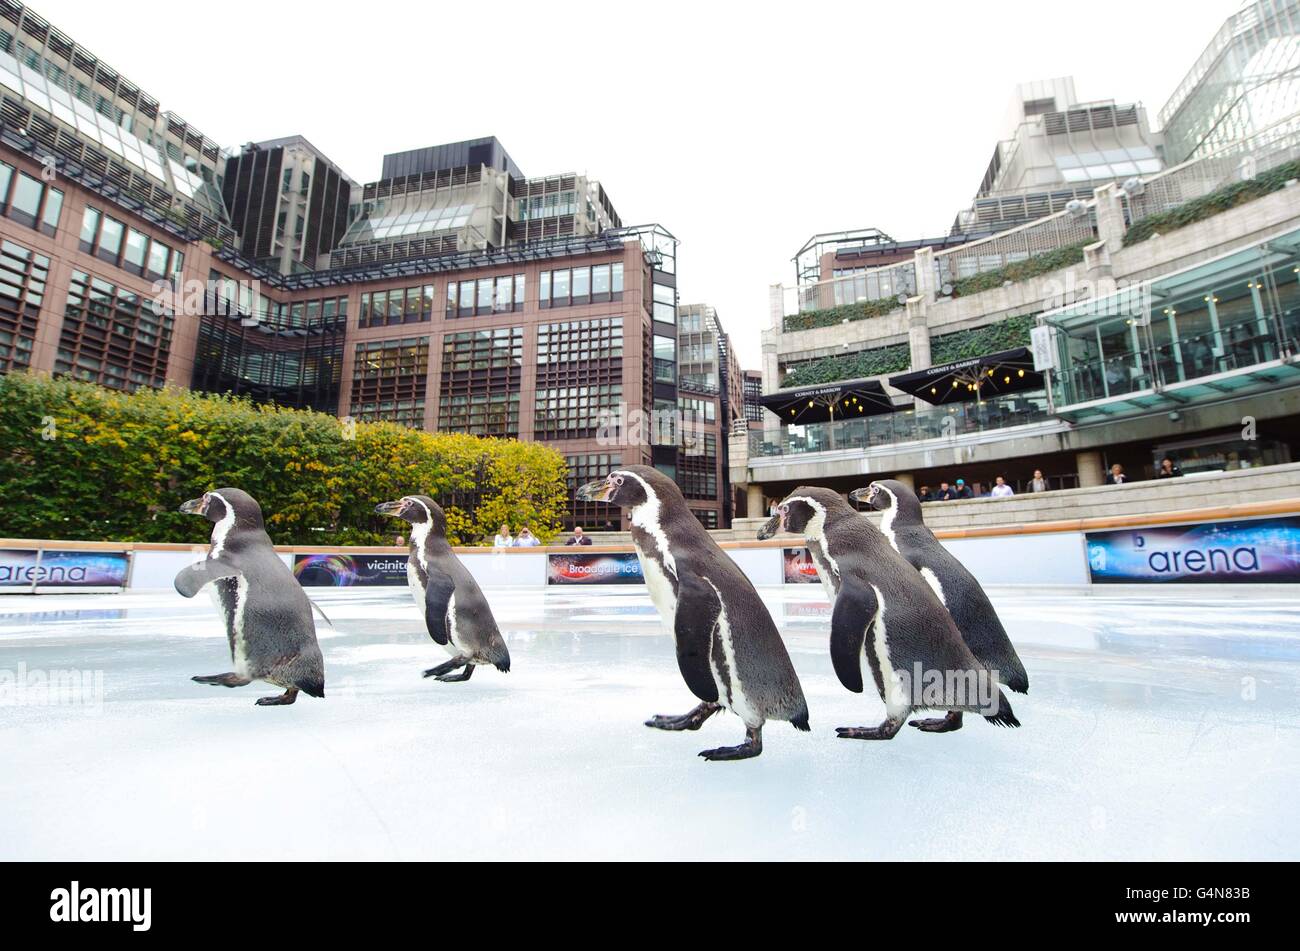 Five Humboldt Penguins from Heythrop Zoological Gardens, Oxfordshire, enjoy the ice at the Broadgate Ice rink, situated in the Broadgate Circle in London, before it was opened to the public for the winter season. Stock Photo